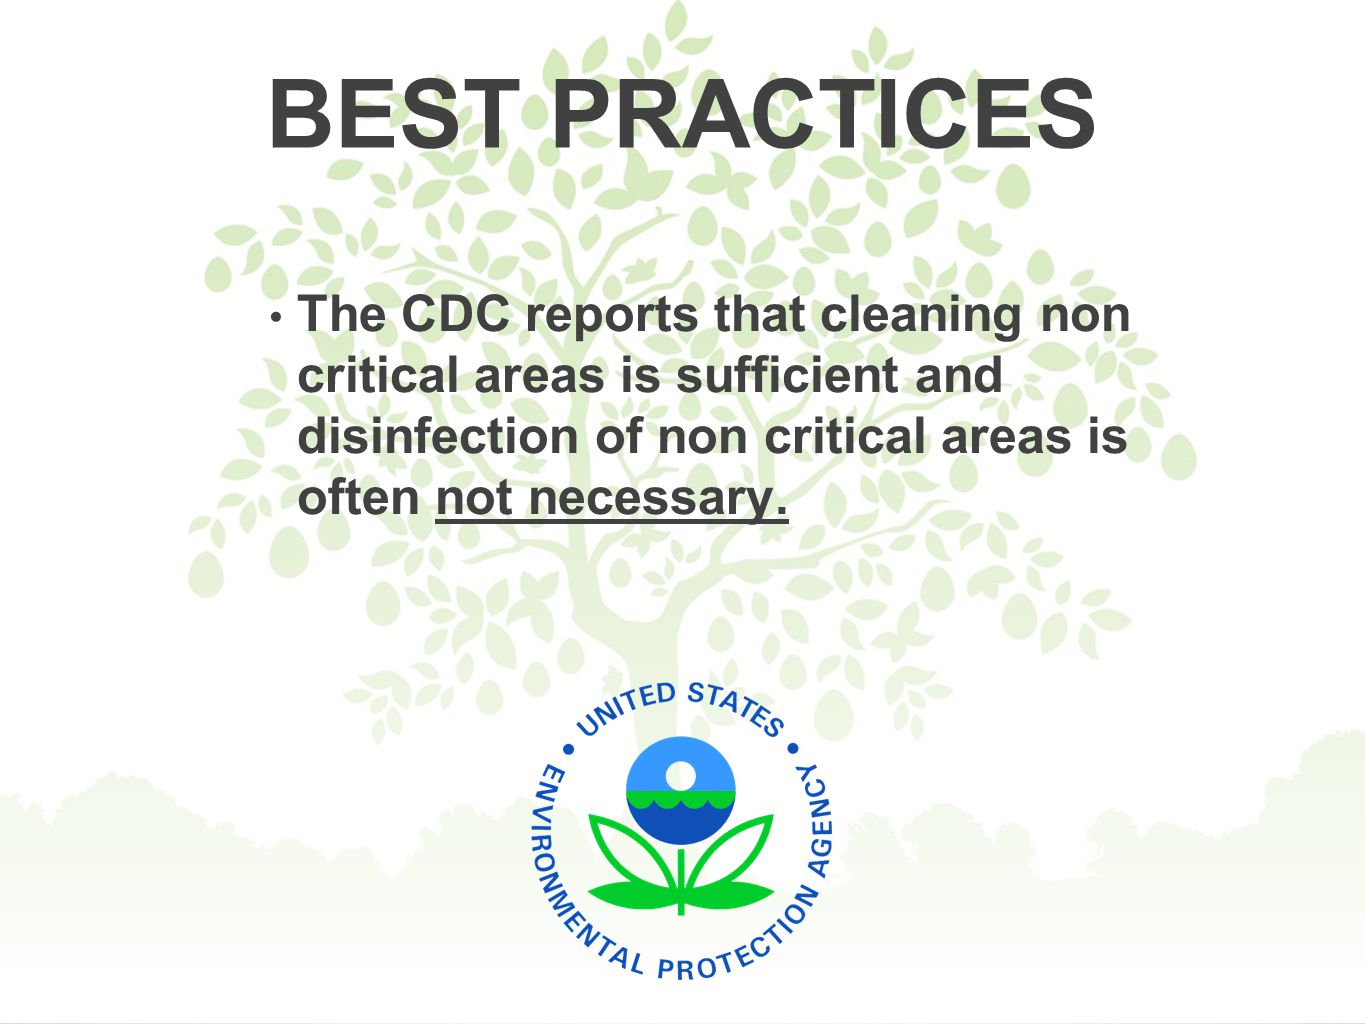 BEST PRACTICES The CDC reports that cleaning non critical areas is sufficient and disinfection of non critical areas is often not necessary.